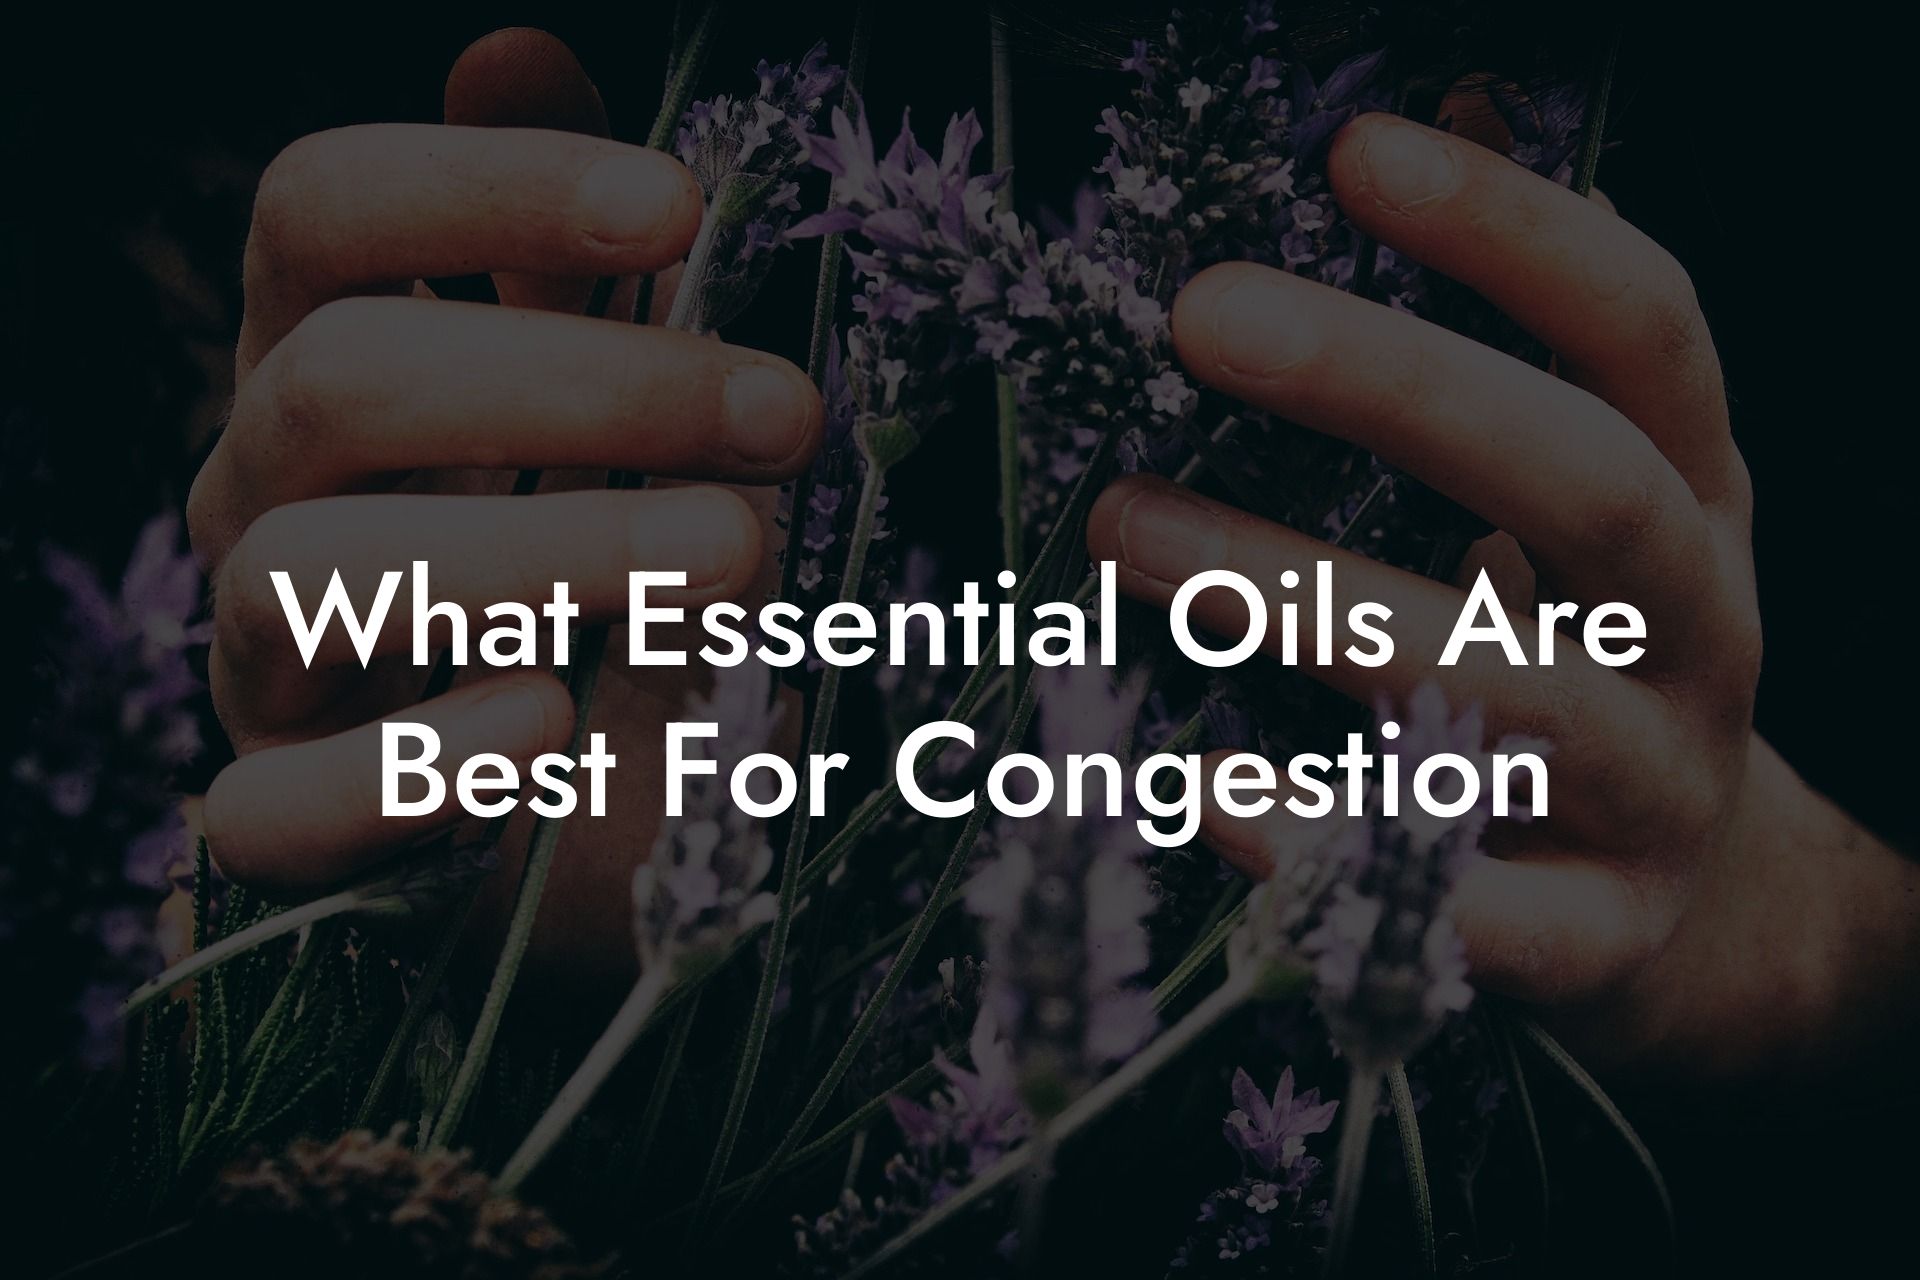 What Essential Oils Are Best For Congestion